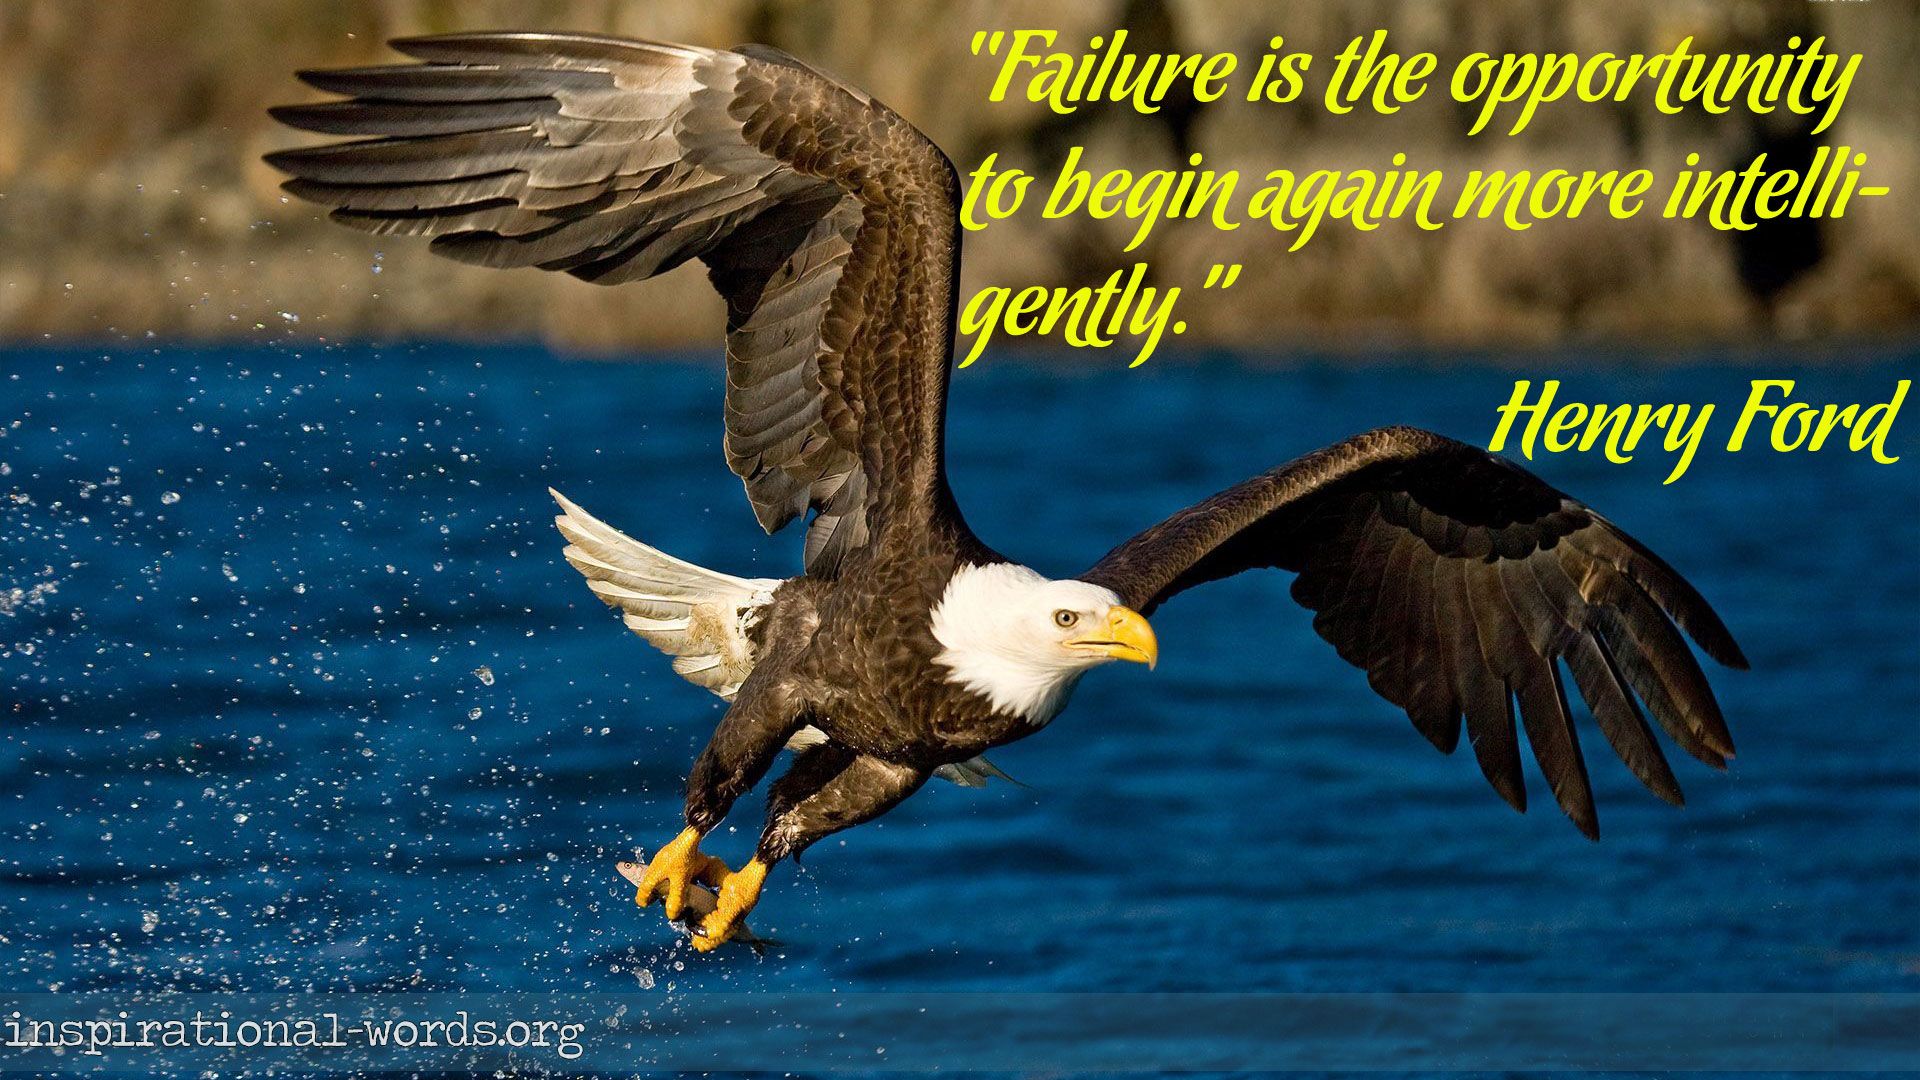 Inspirational Wallpaper Quote by Henry Ford “Failure is the opportunity to begin again more intelligently.”. Белоголовый орлан, Животные, Дикие животные